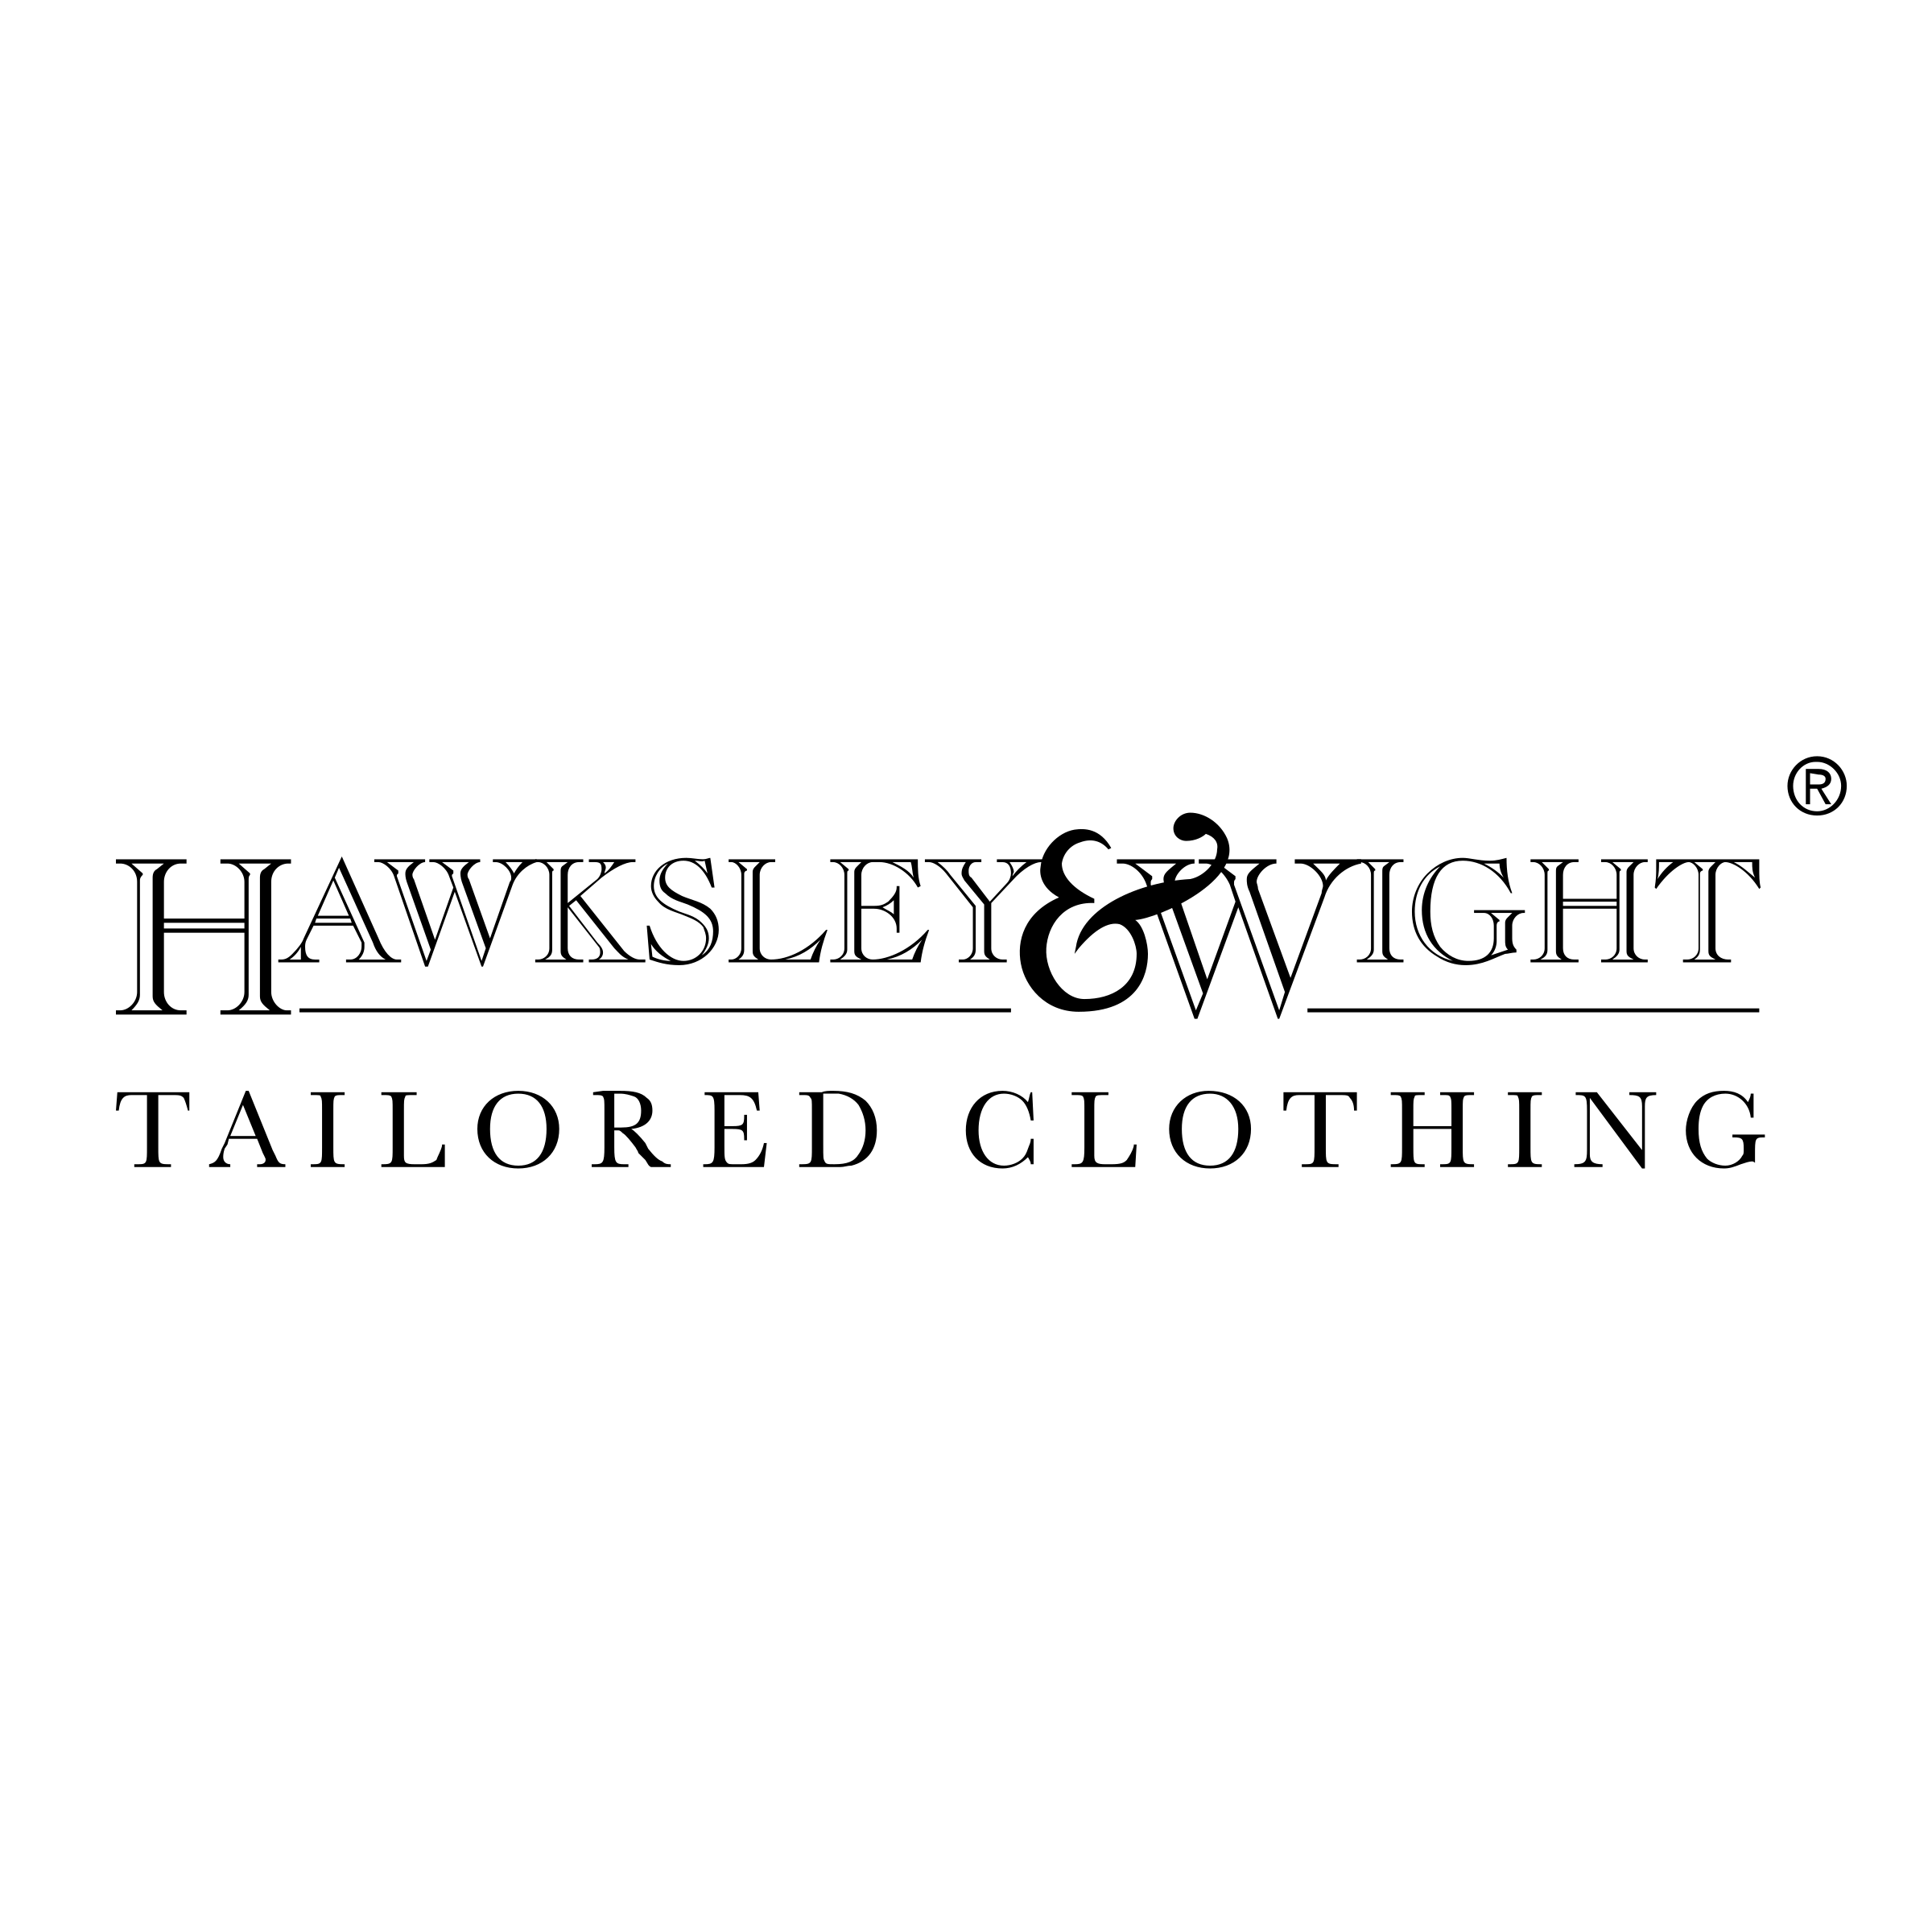 Black and Wight Logo - Hawksley & Wight Logo PNG Transparent & SVG Vector - Freebie Supply